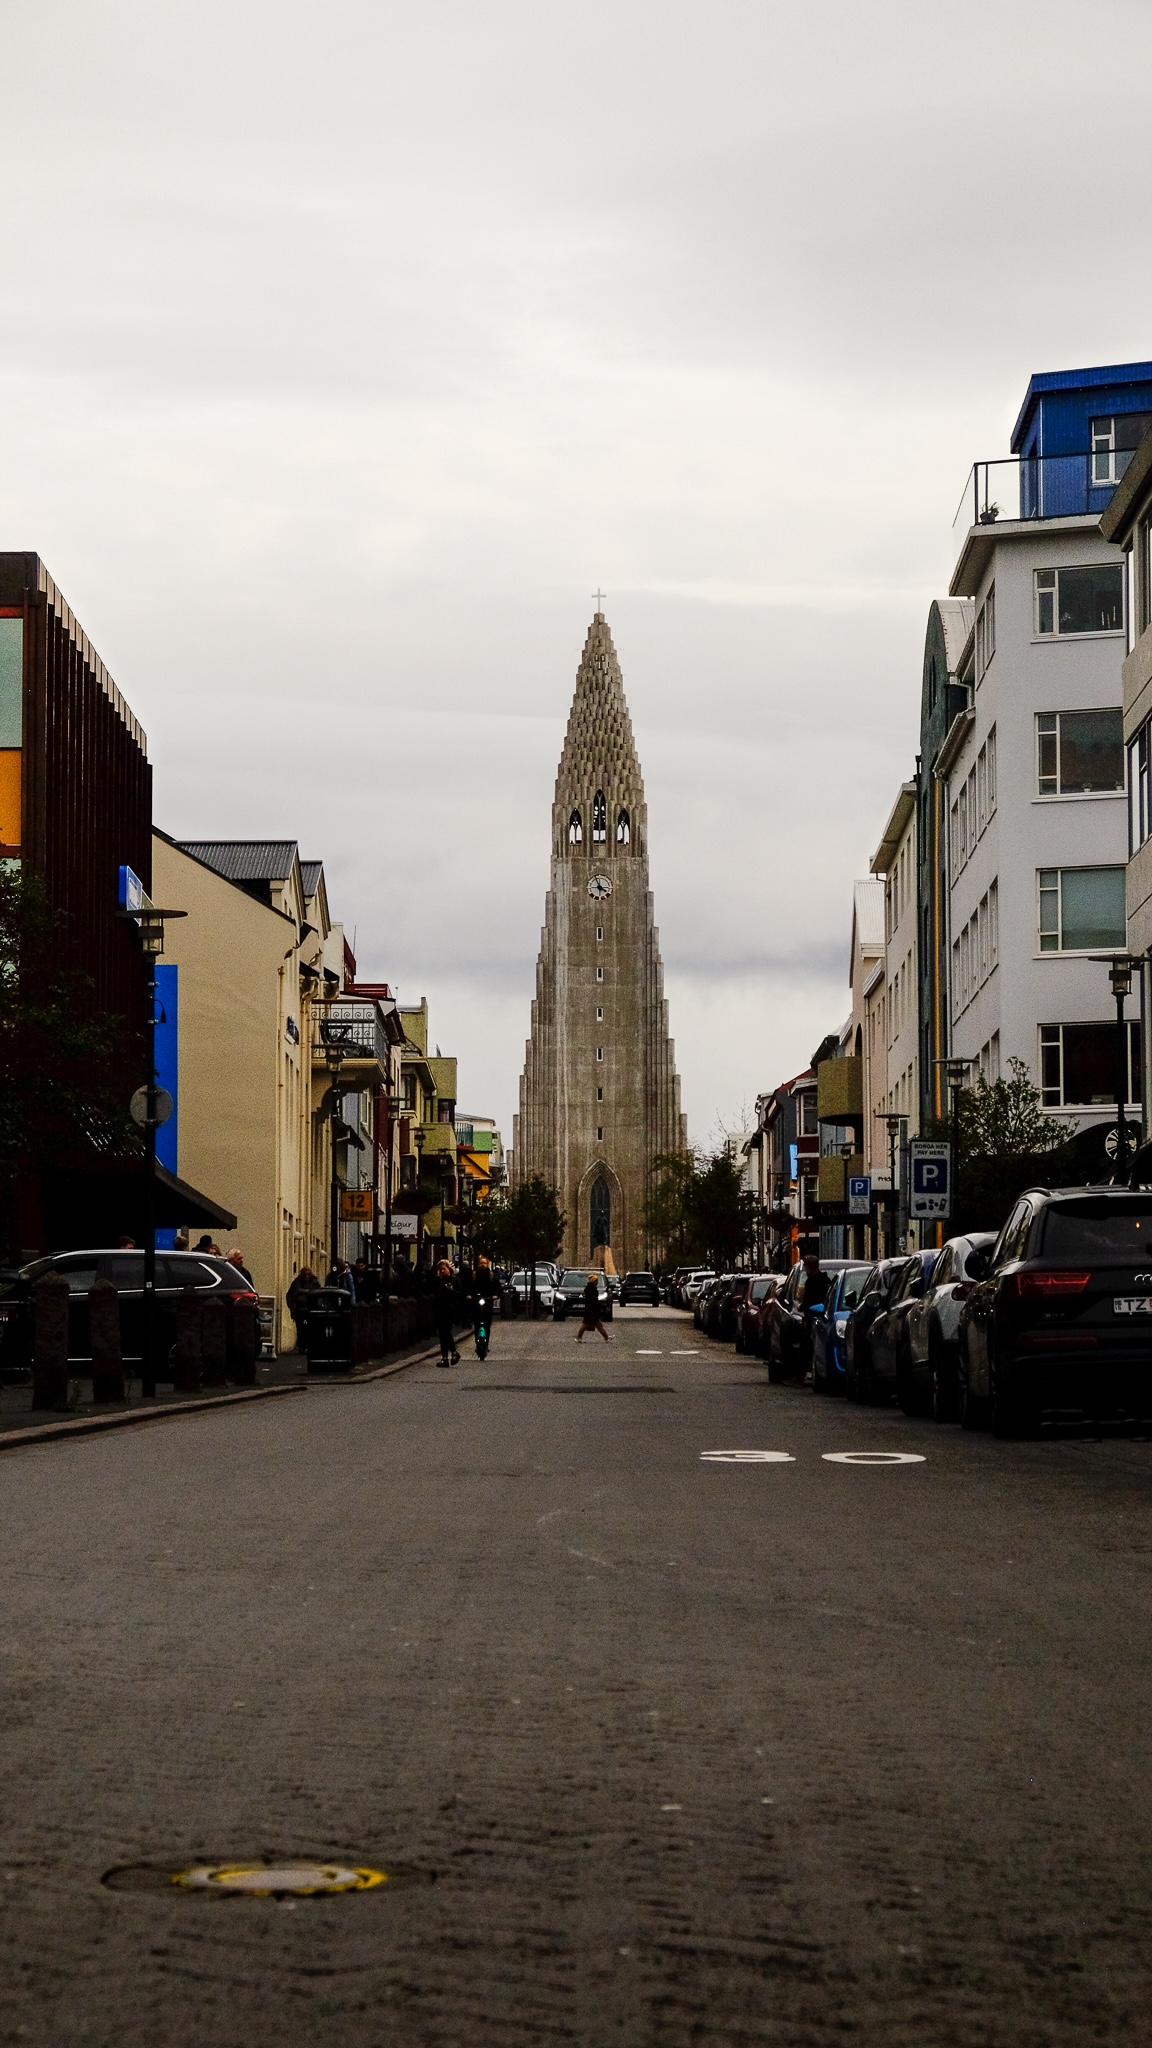 Hallgrimskirkja church up a road with an incline, imposing in the distance